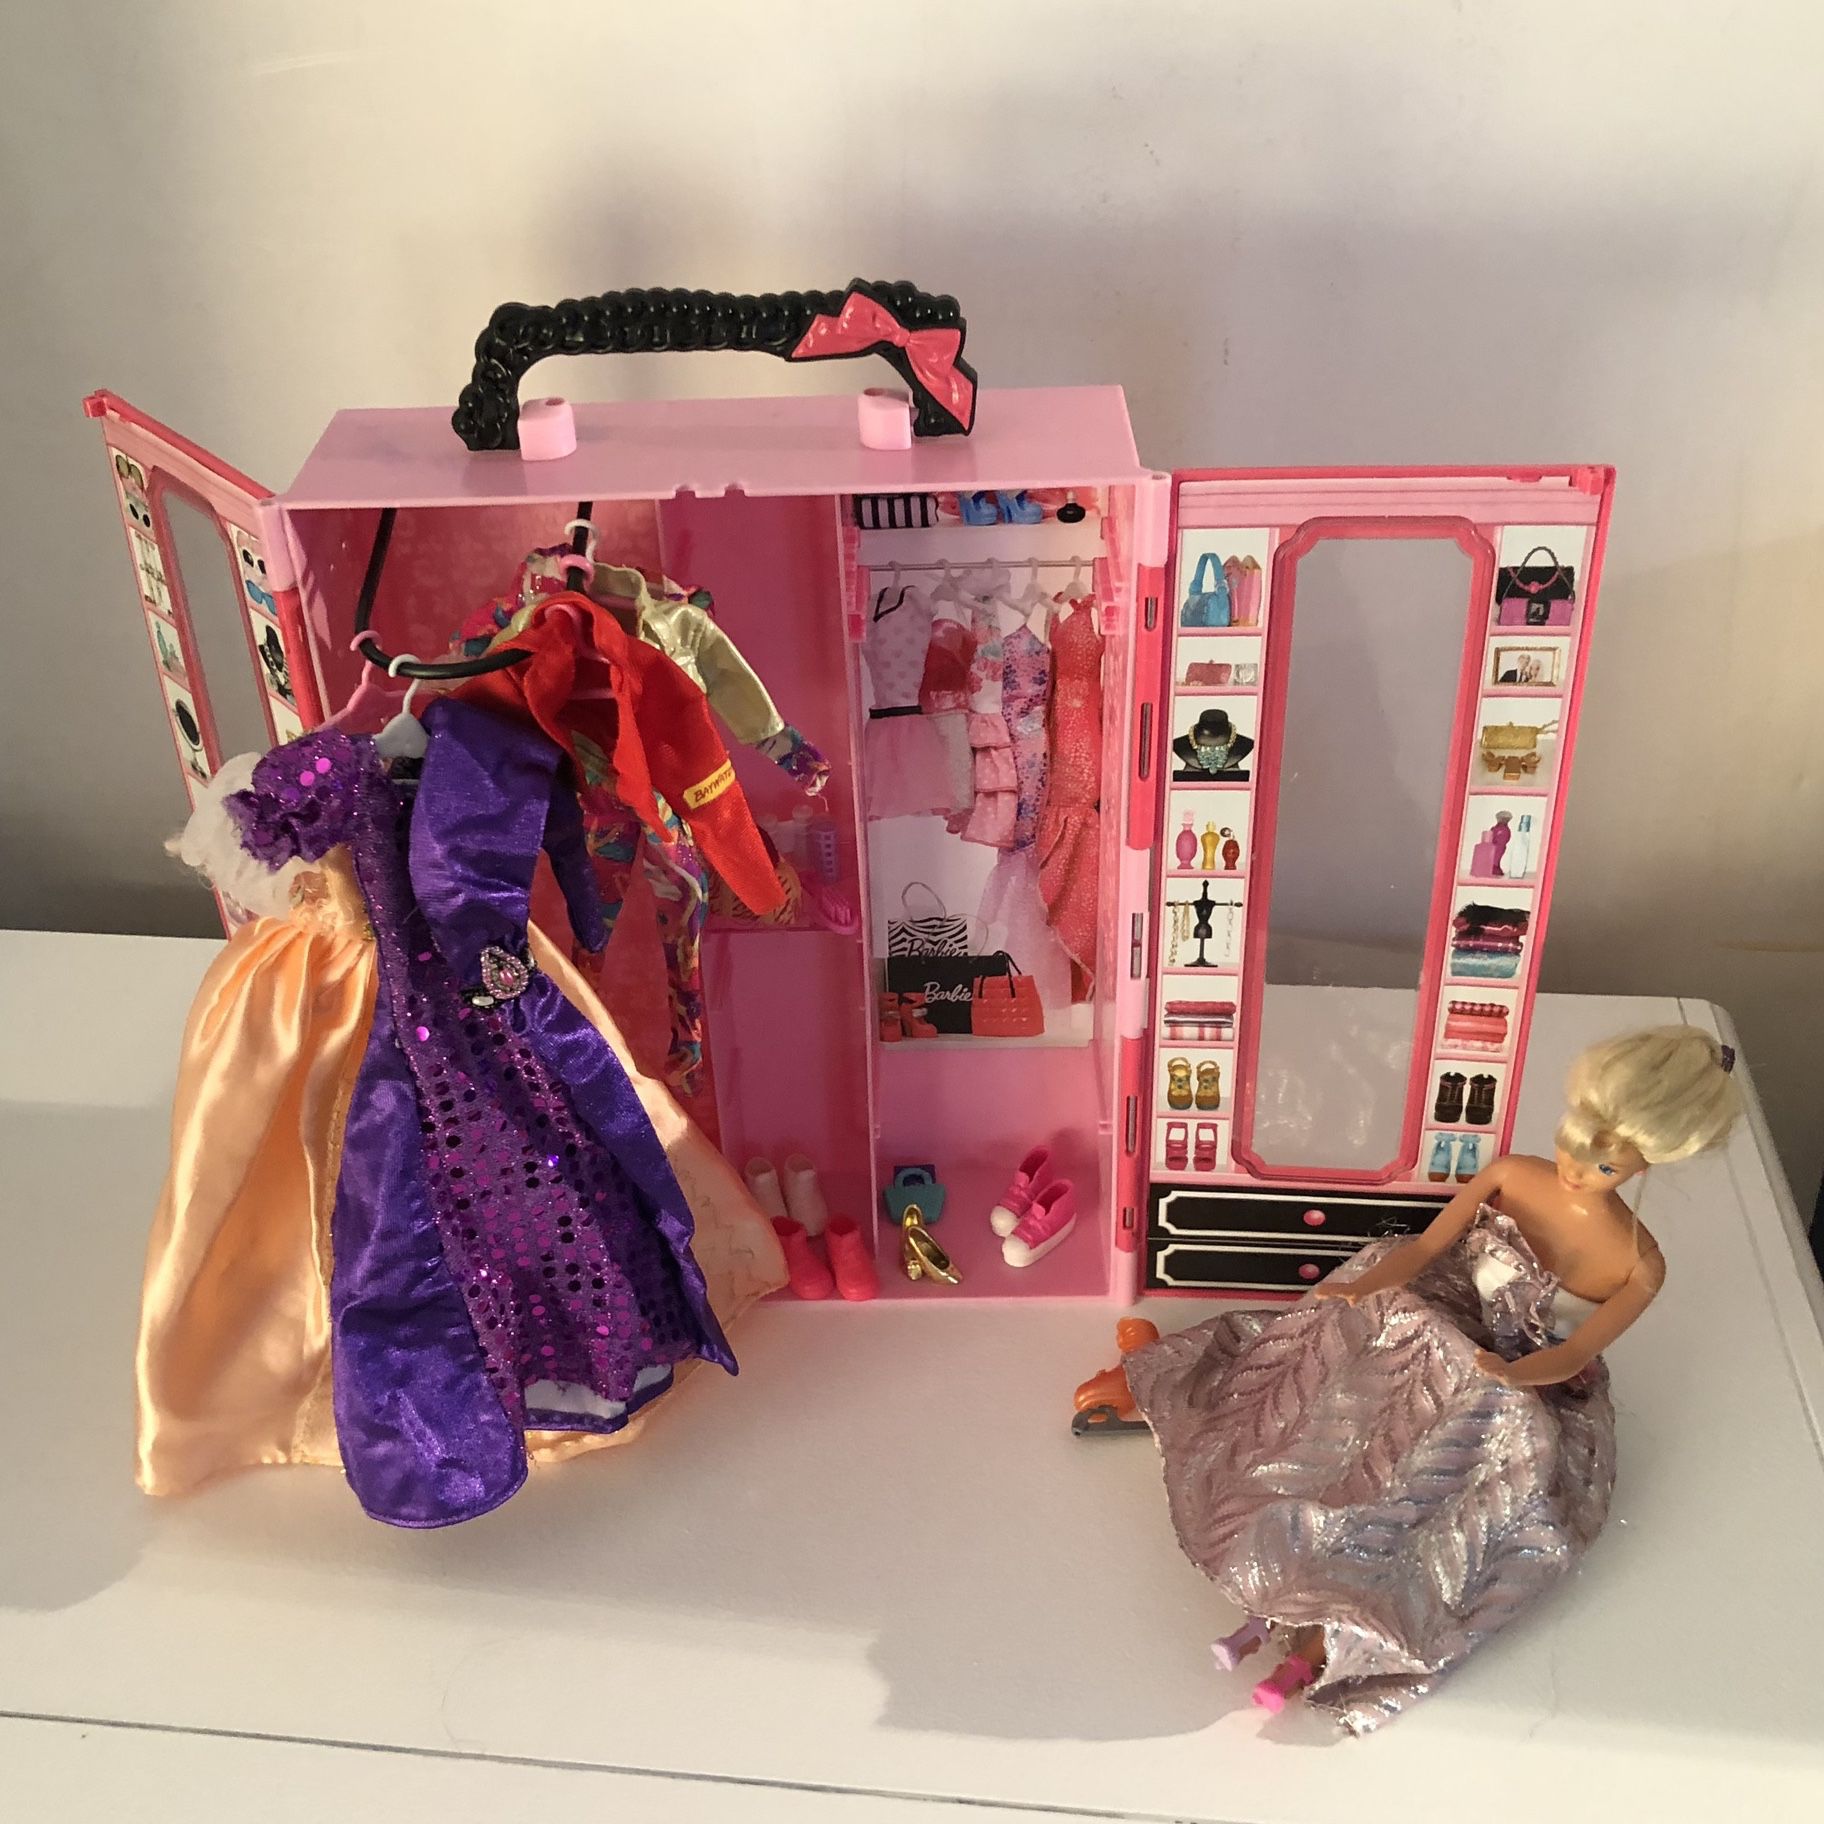 Barbie closet with Barbie clothes / outfits / accessories